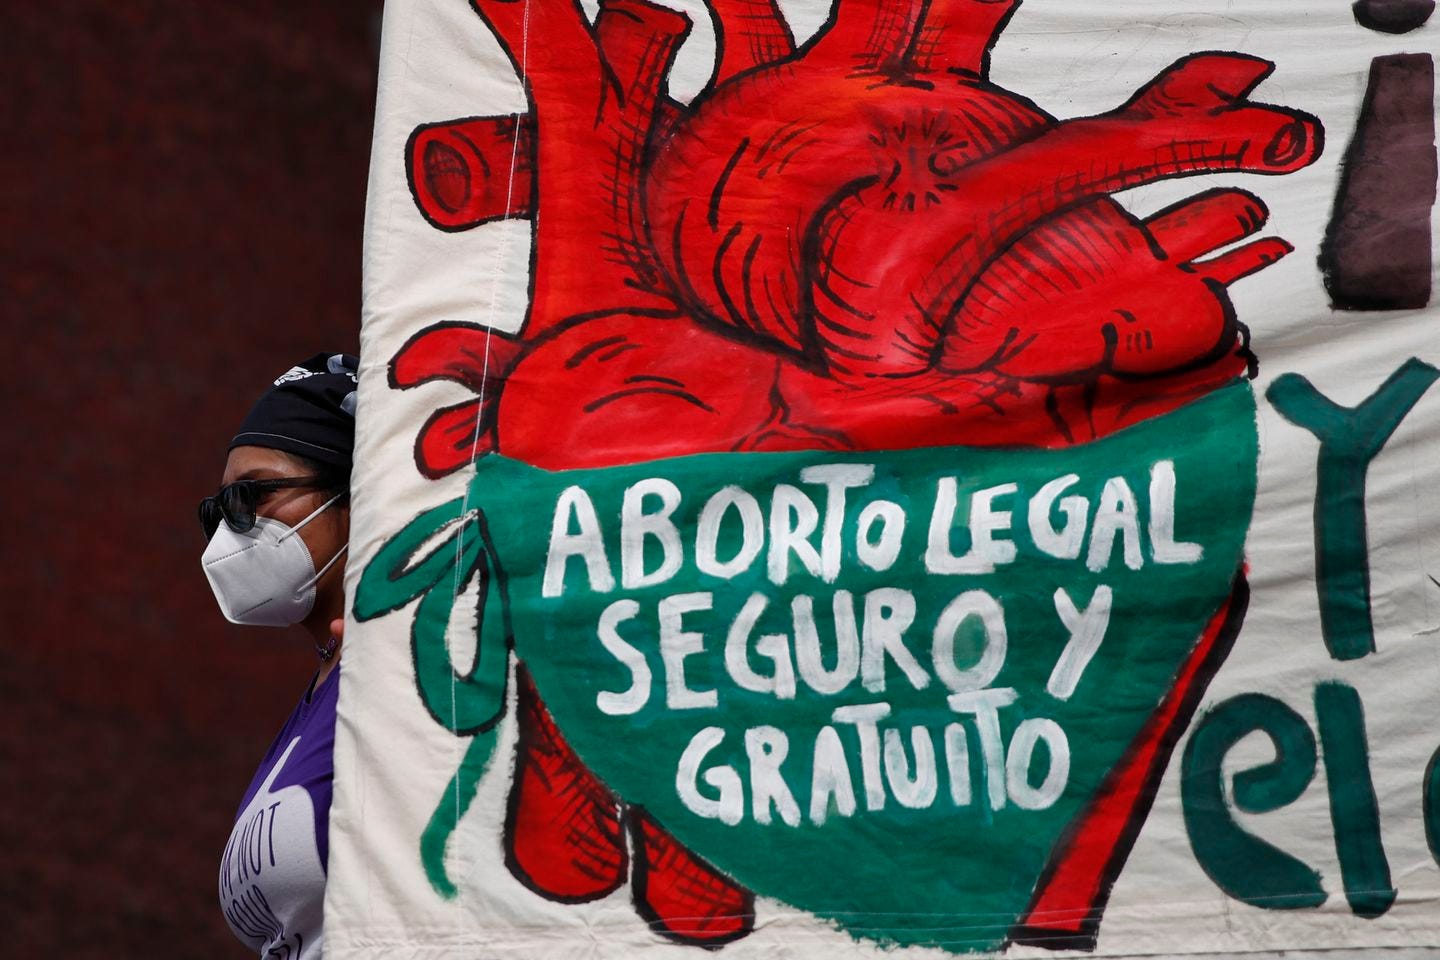 A woman held a banner reading, in Spanish, "Legal, safe, and free abortion, legalize and decriminalize abortion now, for the independence and autonomy of our bodies," as abortion-rights protesters demonstrated in front of the National Congress on the "Day for Decriminalization of Abortion in Latin America and the Caribbean," in Mexico City in September 2020.